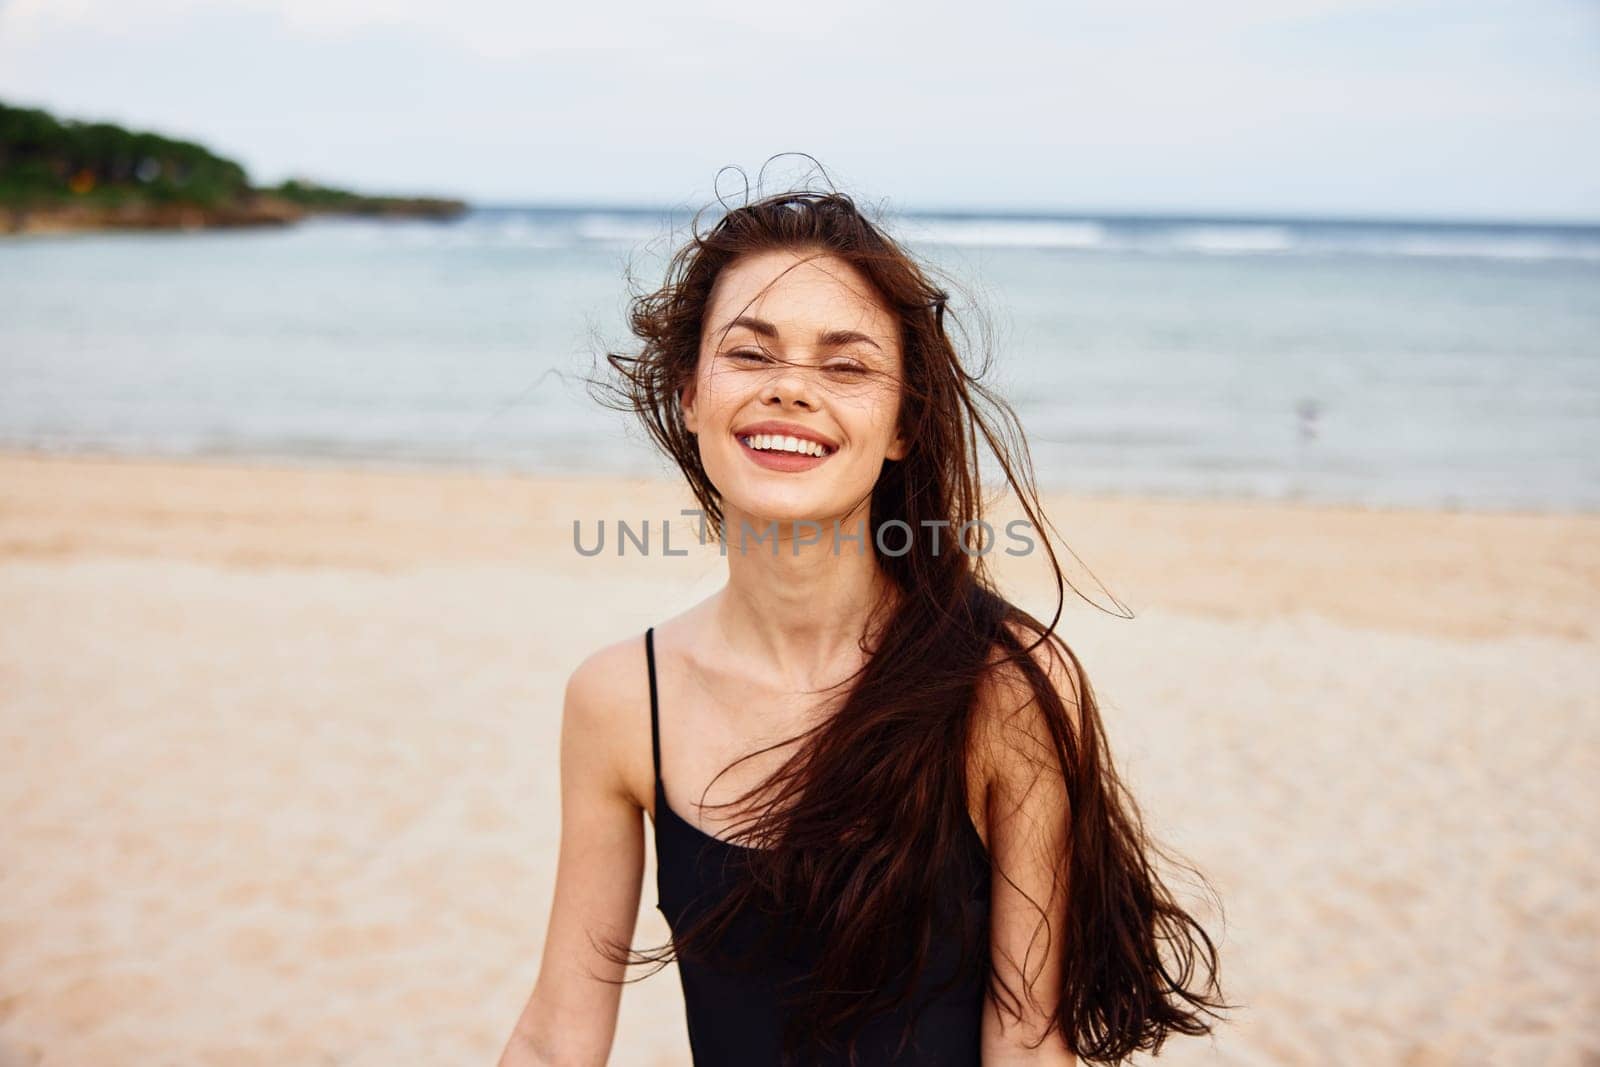 woman enjoyment beach beauty sea vacation girl coast summer outdoor smile nature freedom sunset sand happy tropical peaceful walking ocean young